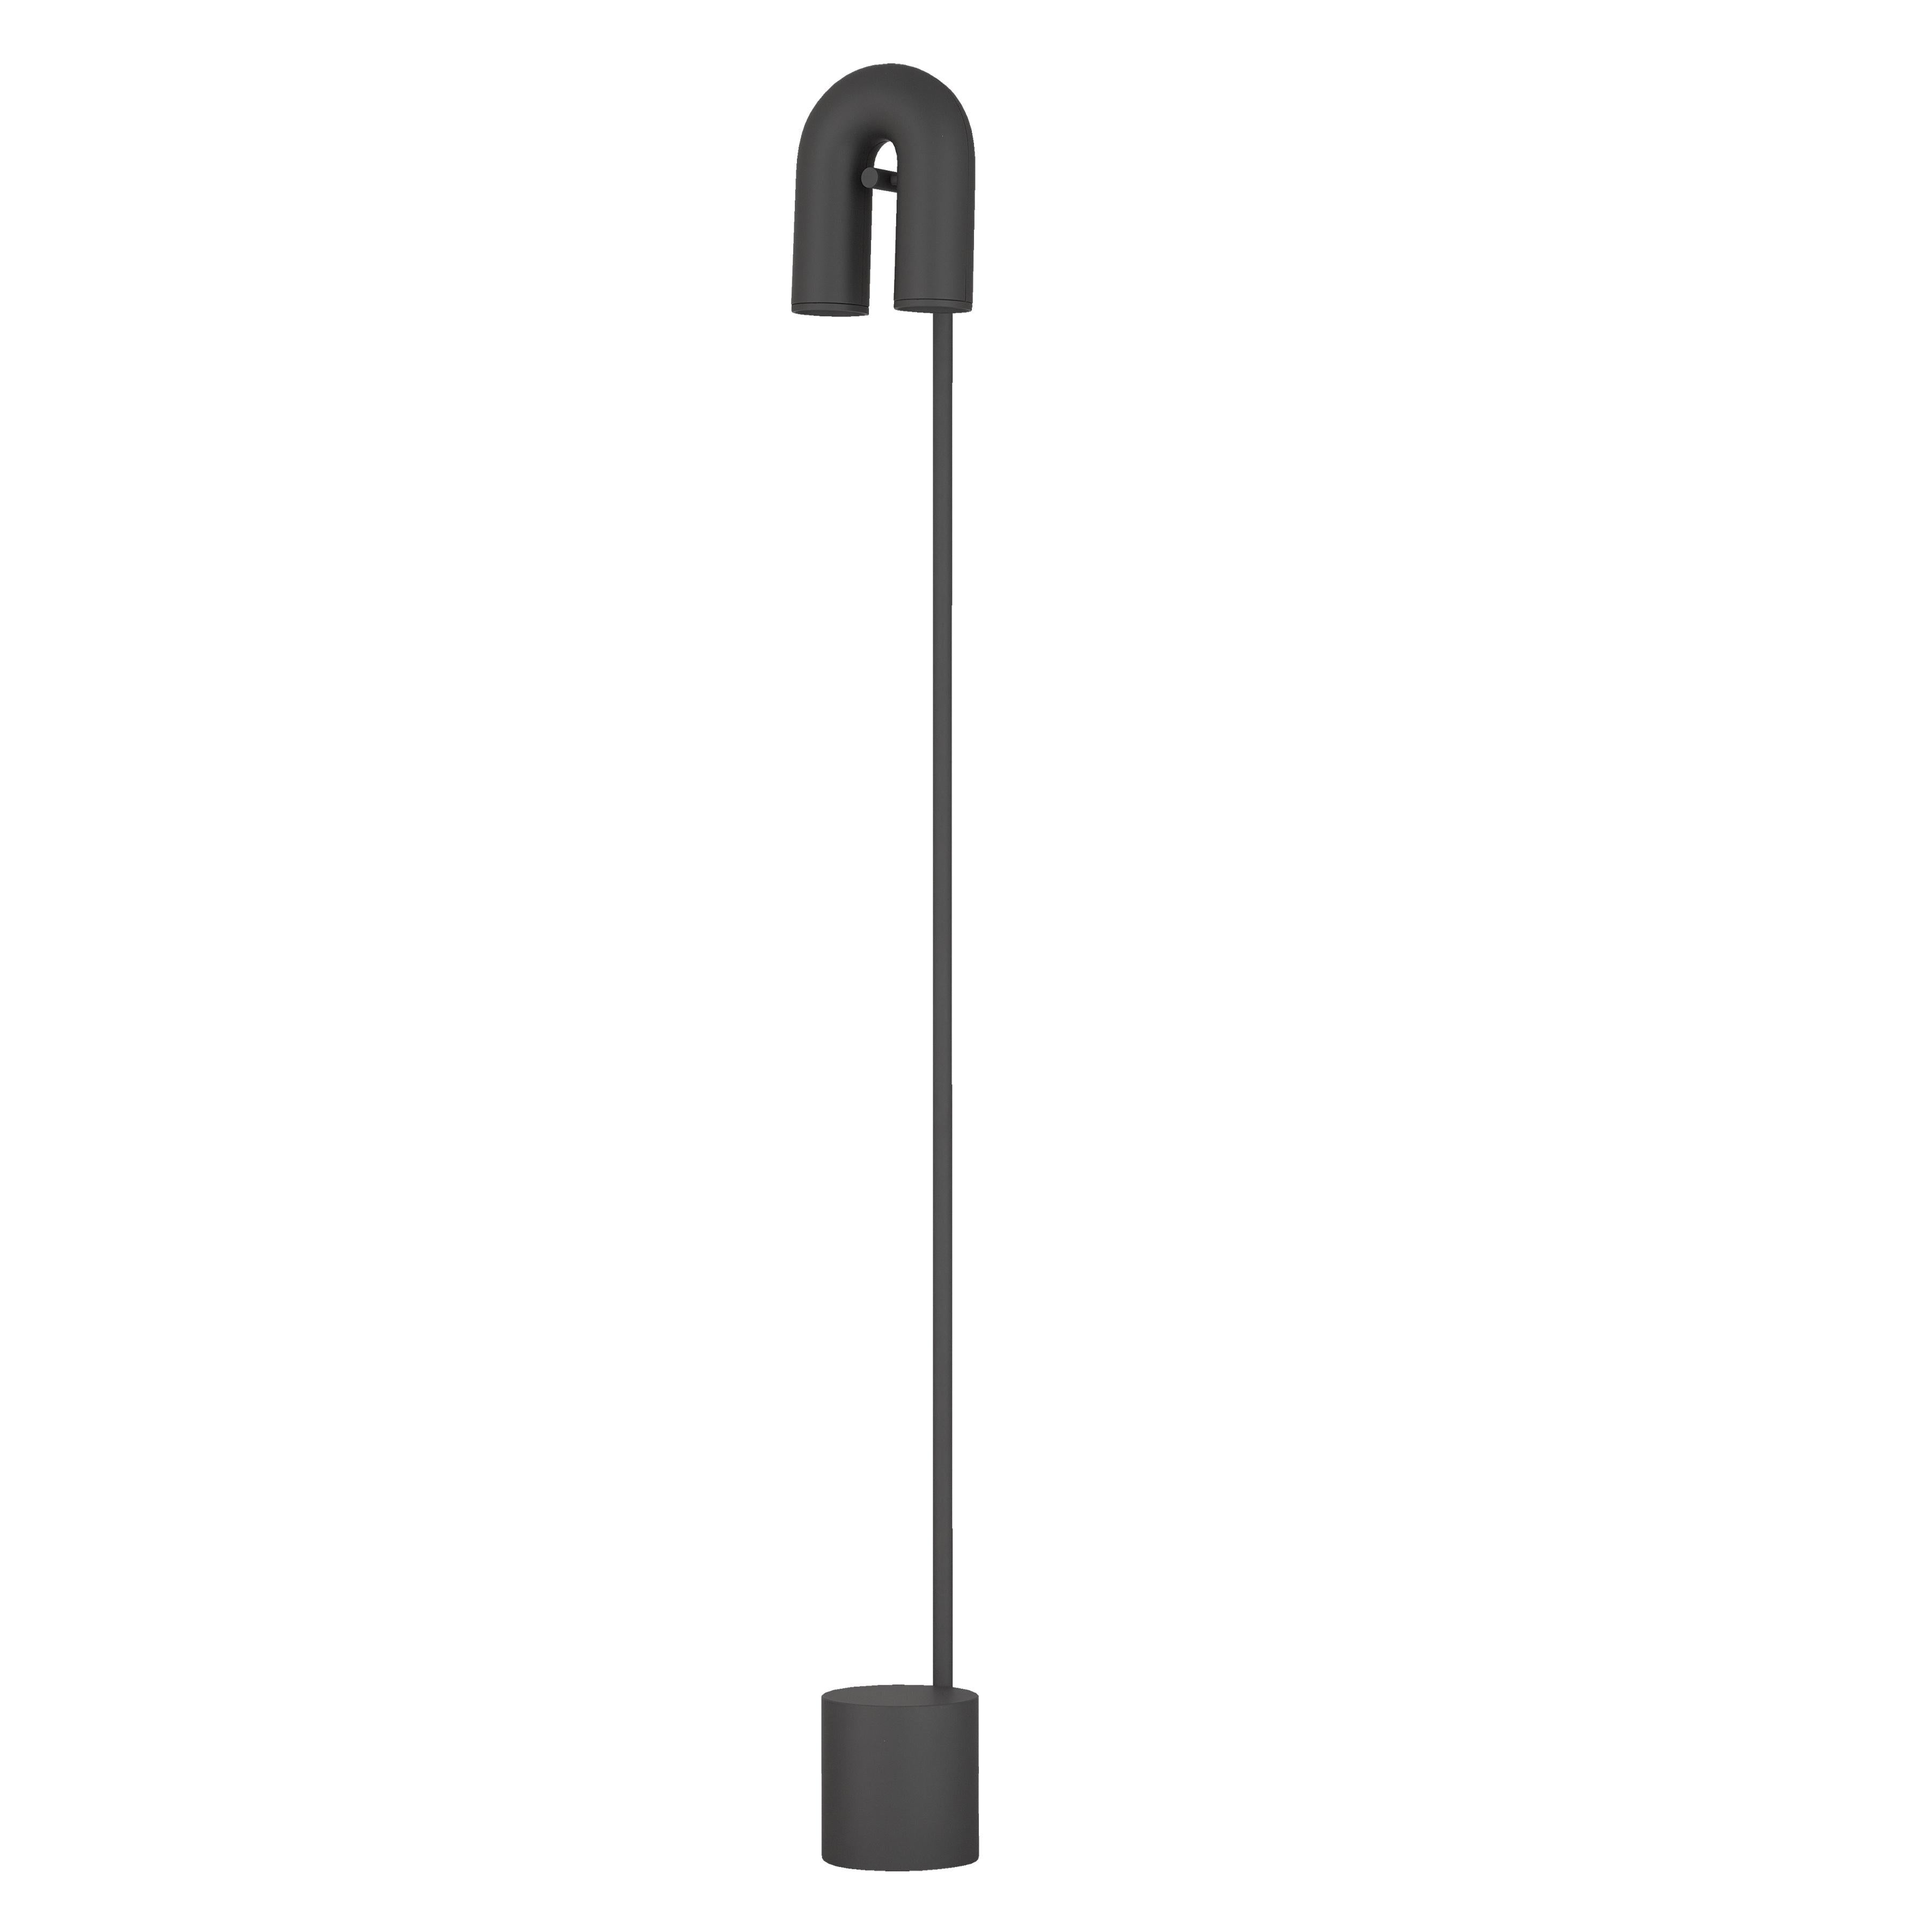 Cirkus Floor Lamps by AGO Lighting
UL LISTED

Coated ABS, aluminum, steel
LED GU10 max 6W x 2, 110-230V

Four colors available: Charcoal, green, grey, terracotta
Dimensions: H 130.5 cm x W 11.5 cm

The Cirkus floor lamps complete the collection of